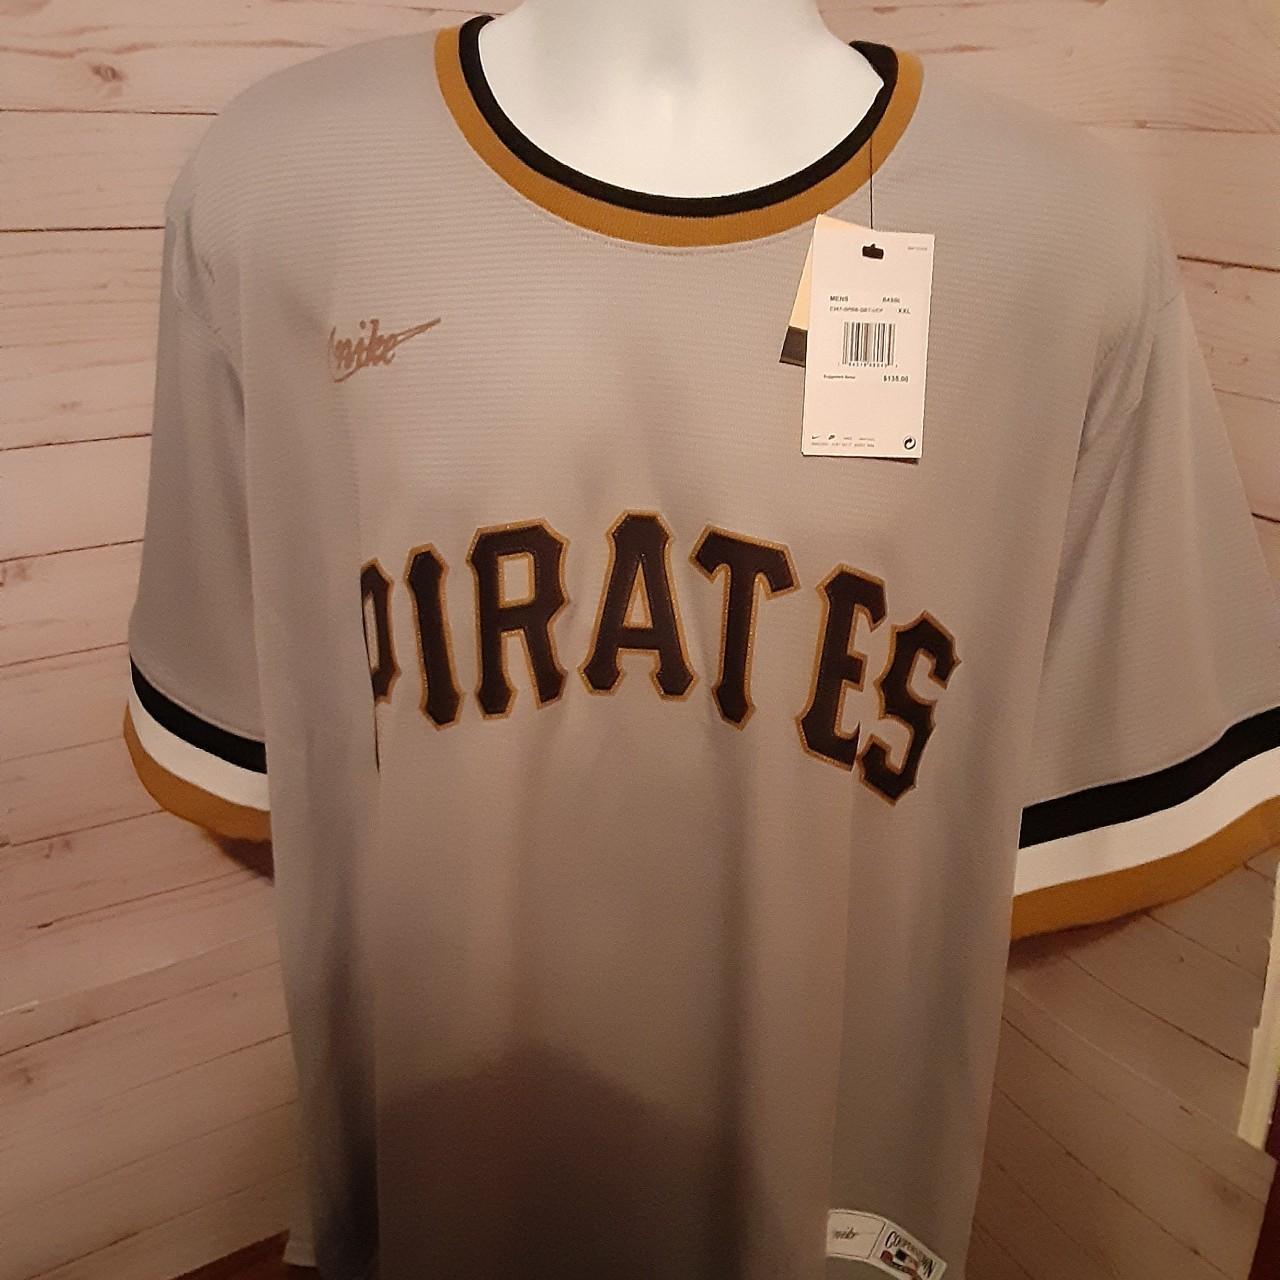 Roberto Clemente jersey by Nike #pirates #pittsburgh - Depop